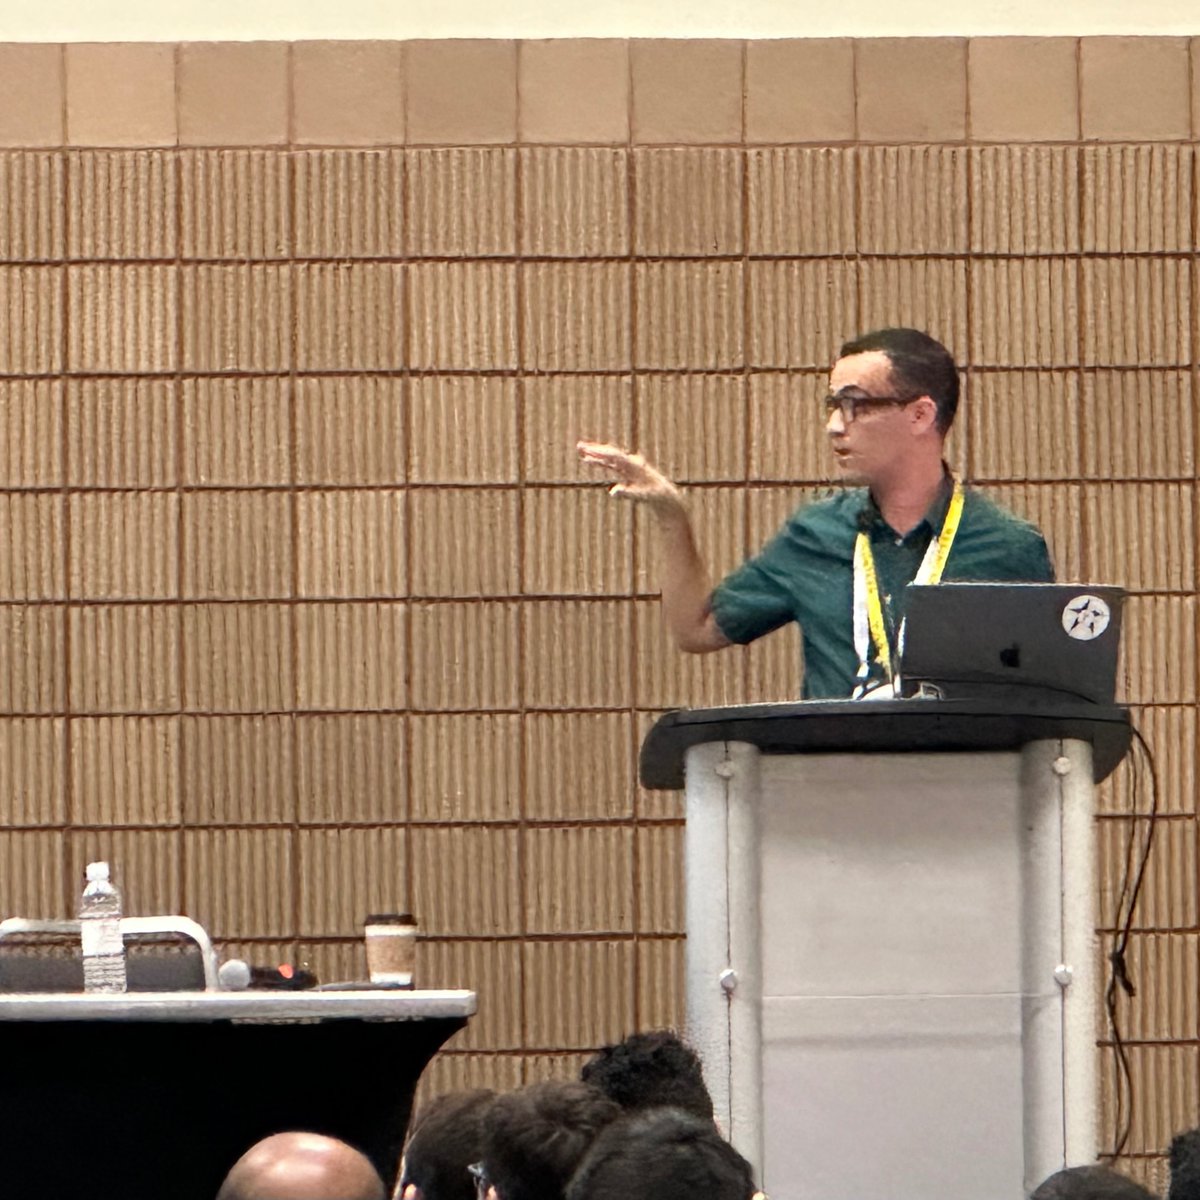 Gasser Elbanna (@gasser_elbanna) gave an exciting lightning talk on understanding speaker identify coding in speech models! If you missed it, be sure to connect with Gasser on our Slack! #NeurIPS2023